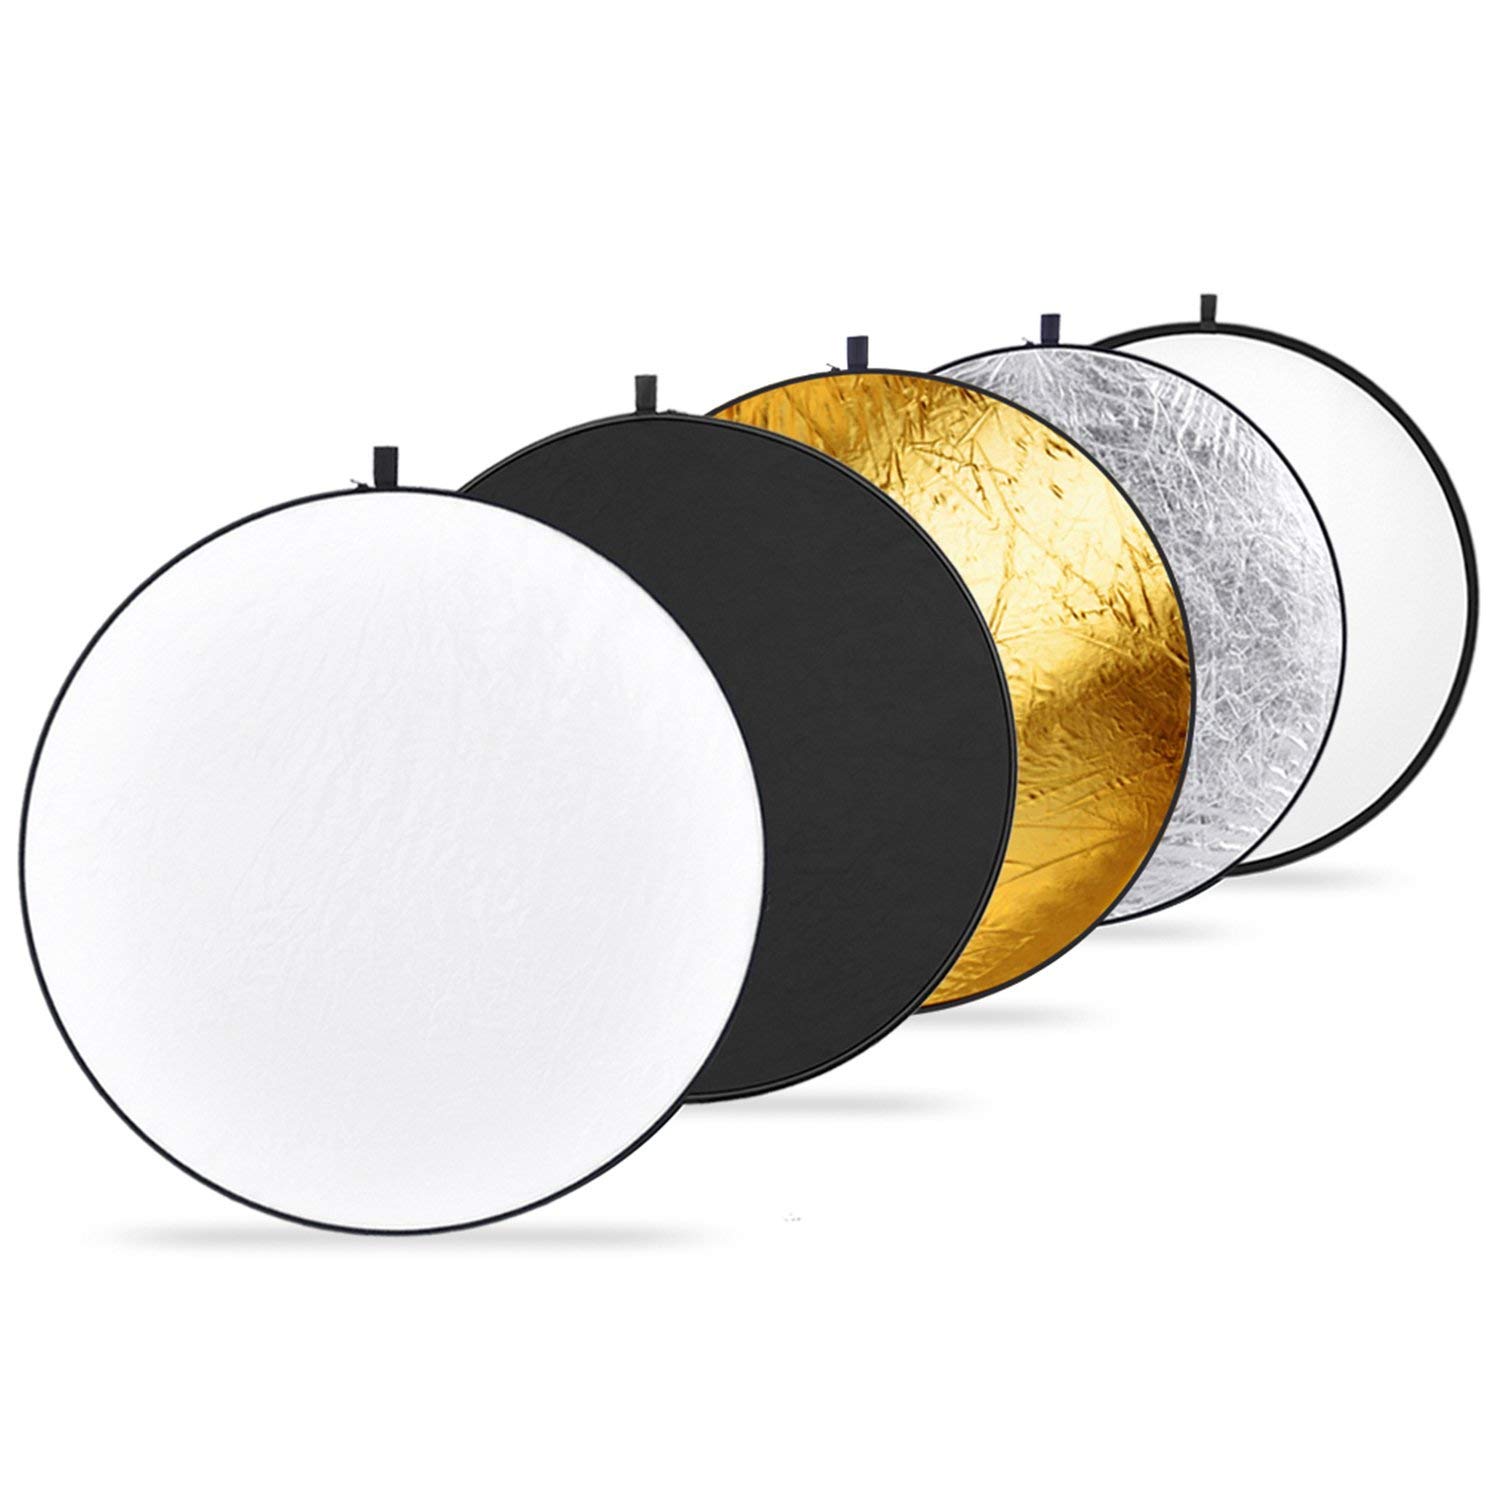 collapsible-multi-disc-light-reflector-with-bag